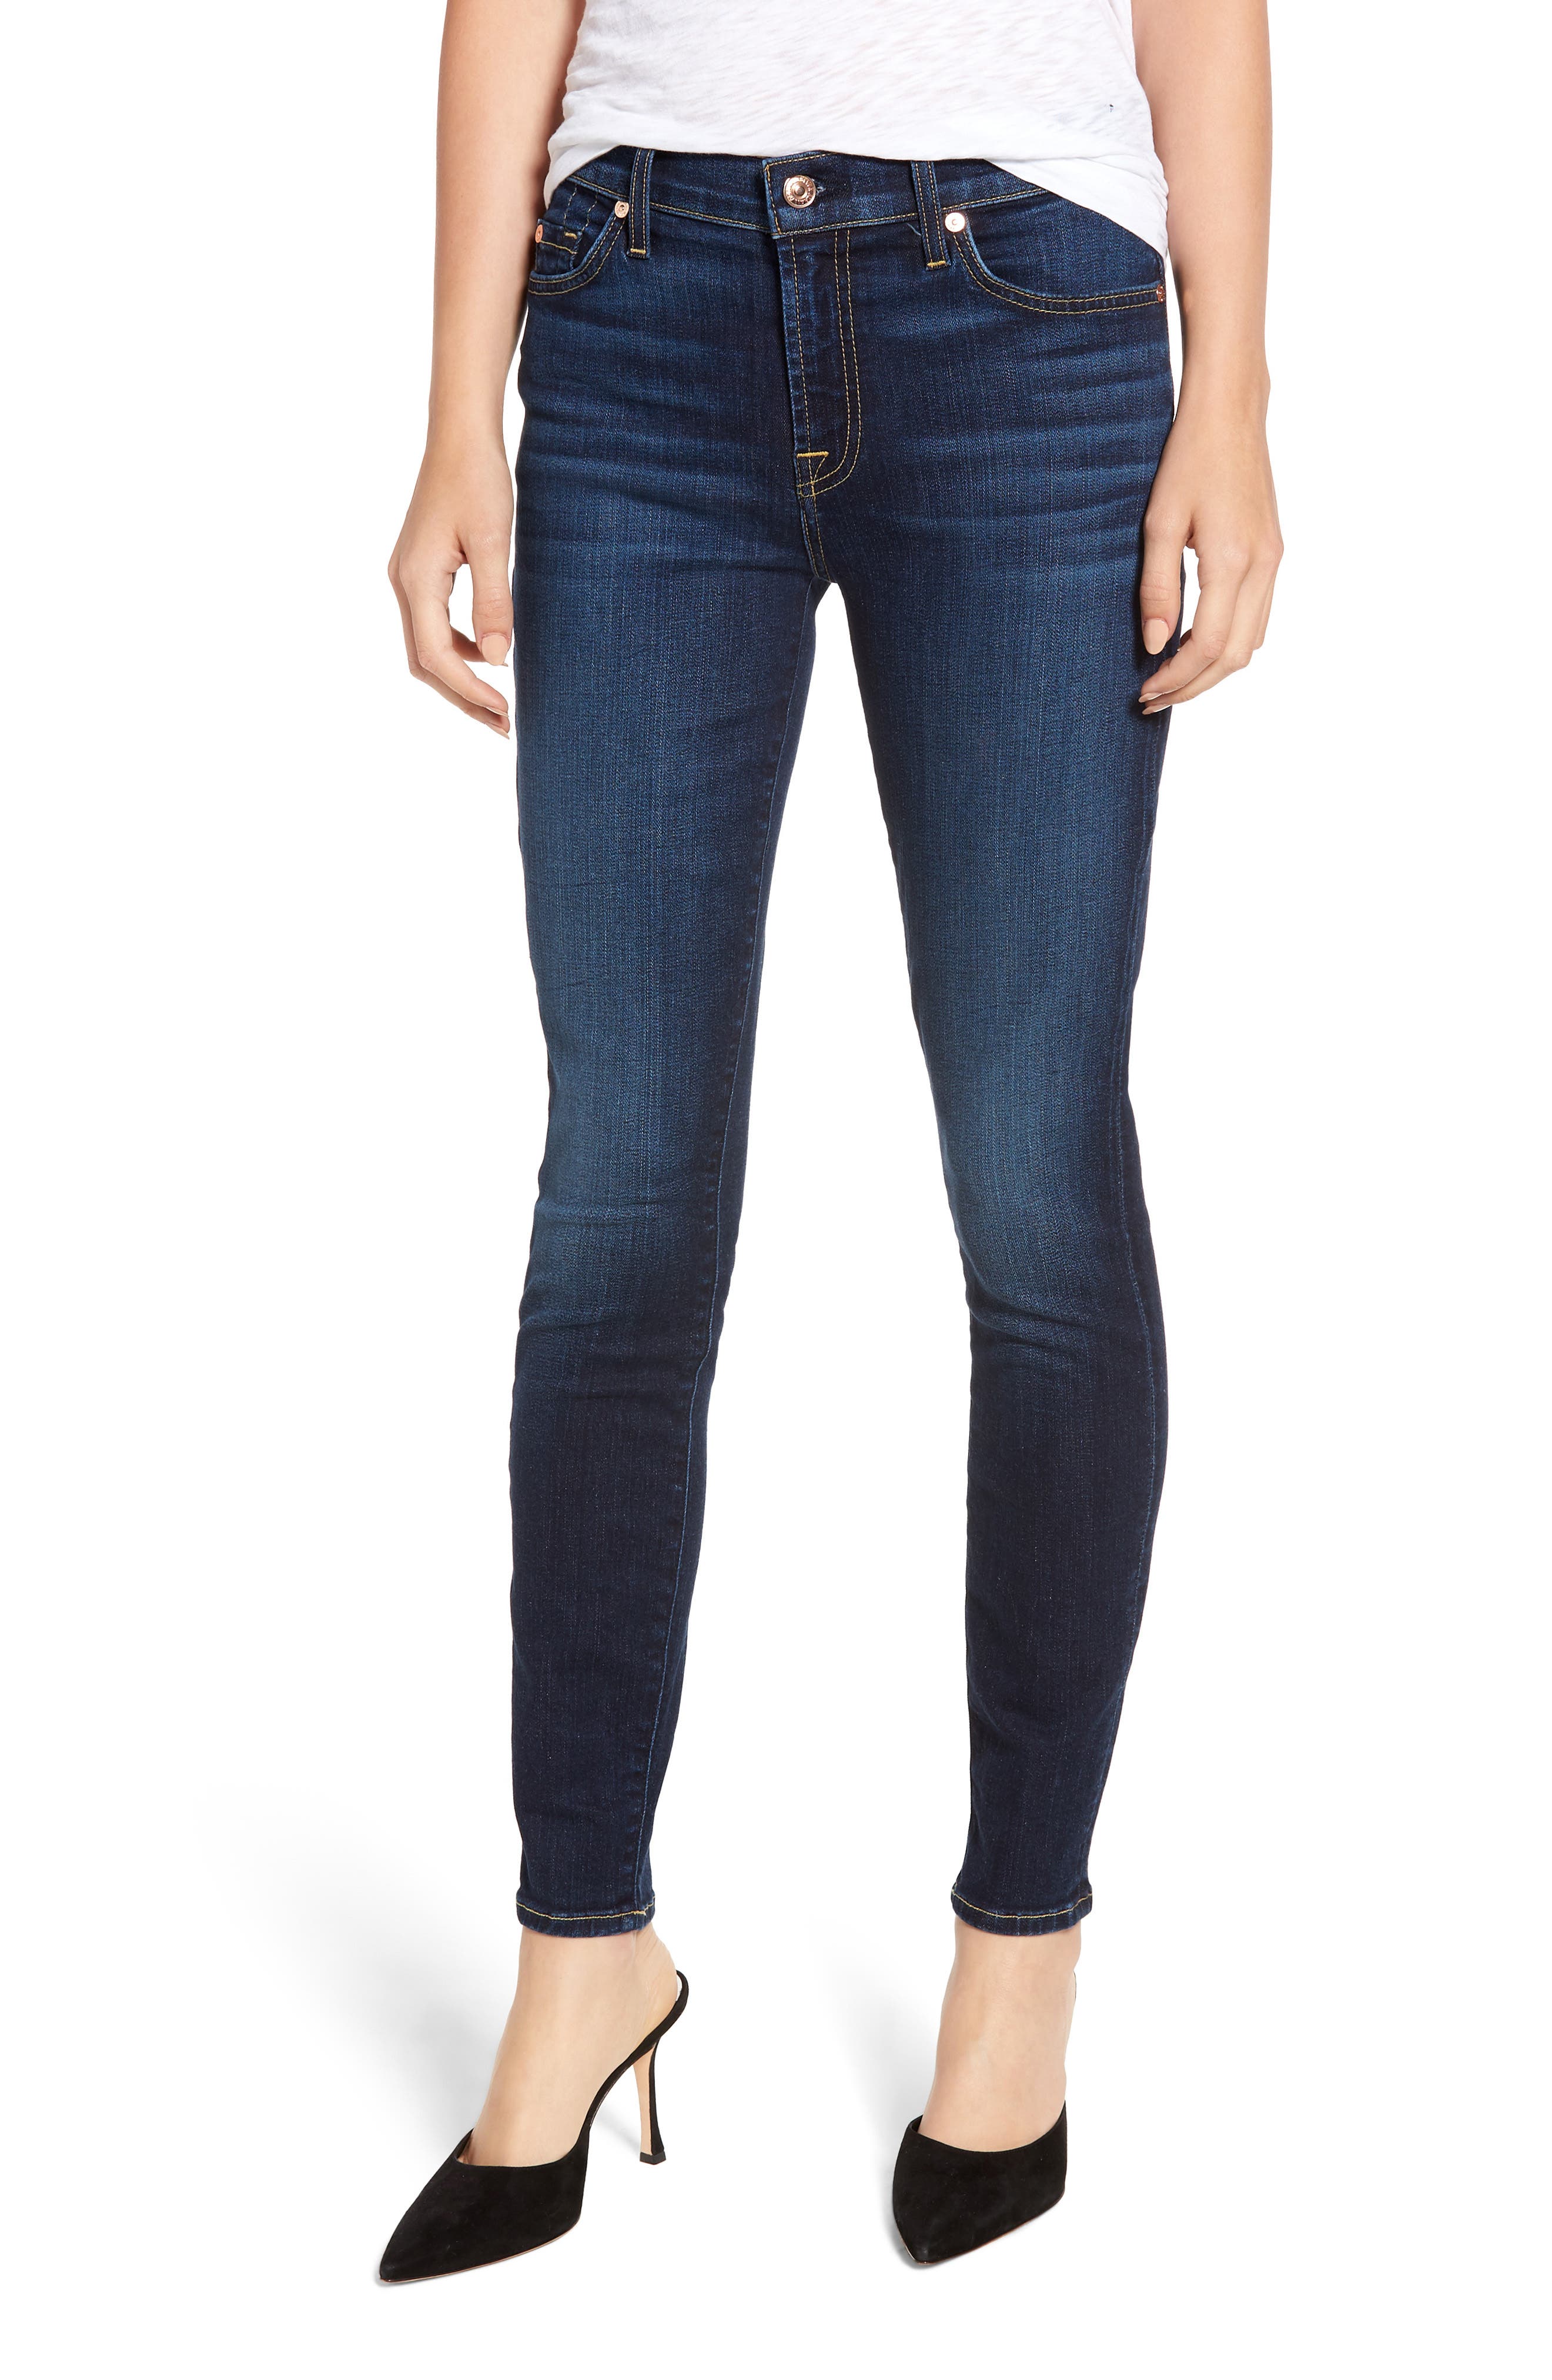 Ankle Skinny Jeans in Fate Air 7 For All Mankind Womens B